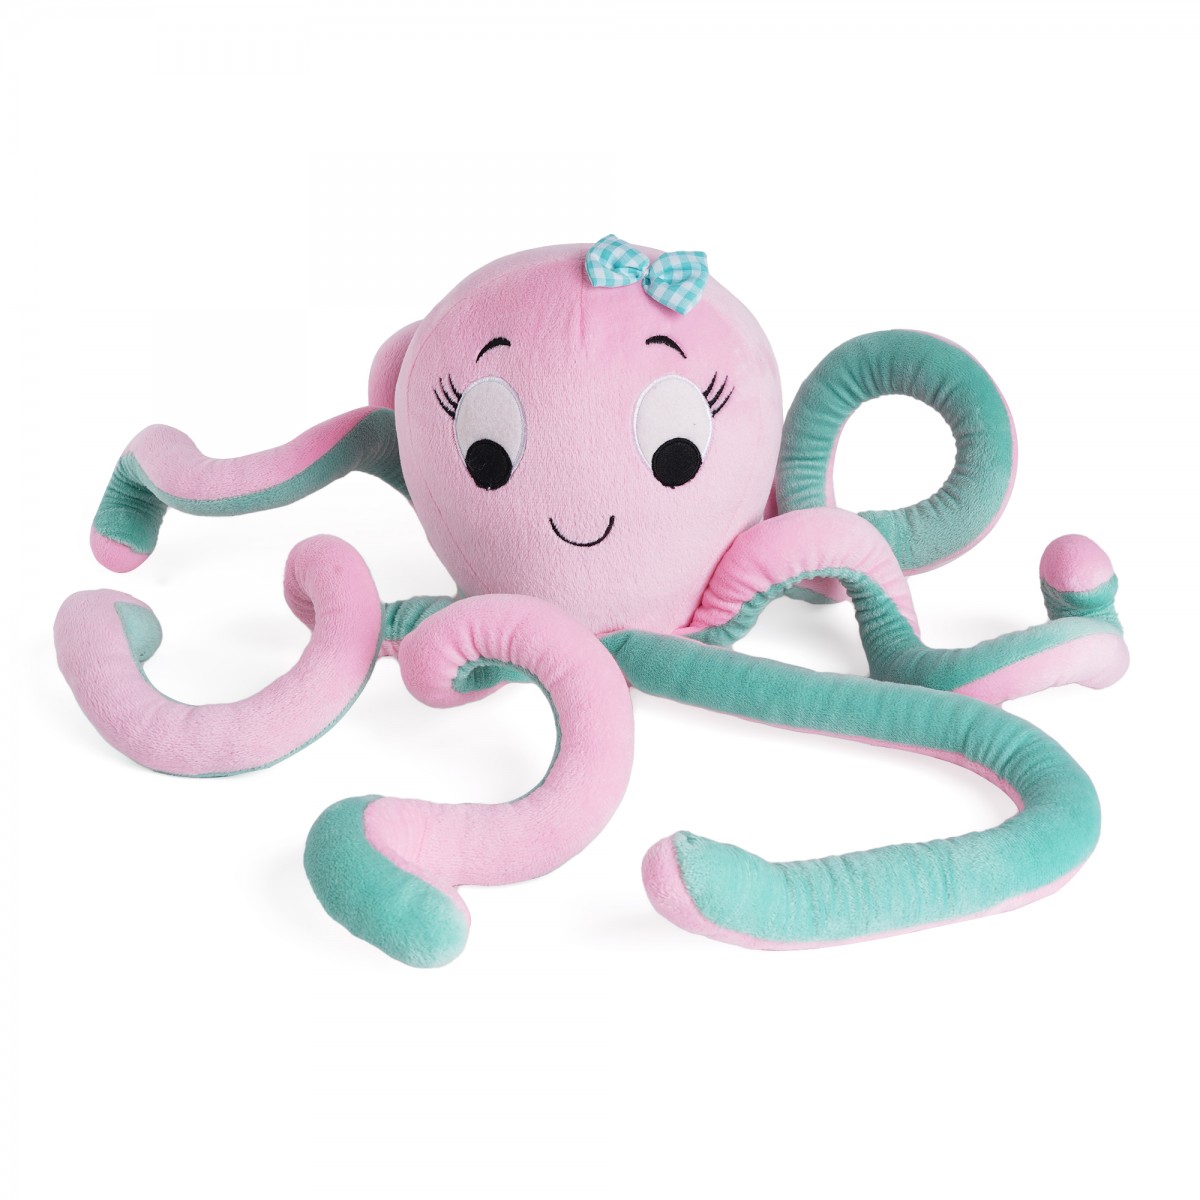 Huggable Cuddly Octopus Stuffed Toy By Fuzzbuzz, Soft Toys for Kids, Cute Plushies Pink, For Kids Of Age 2 Years & Above